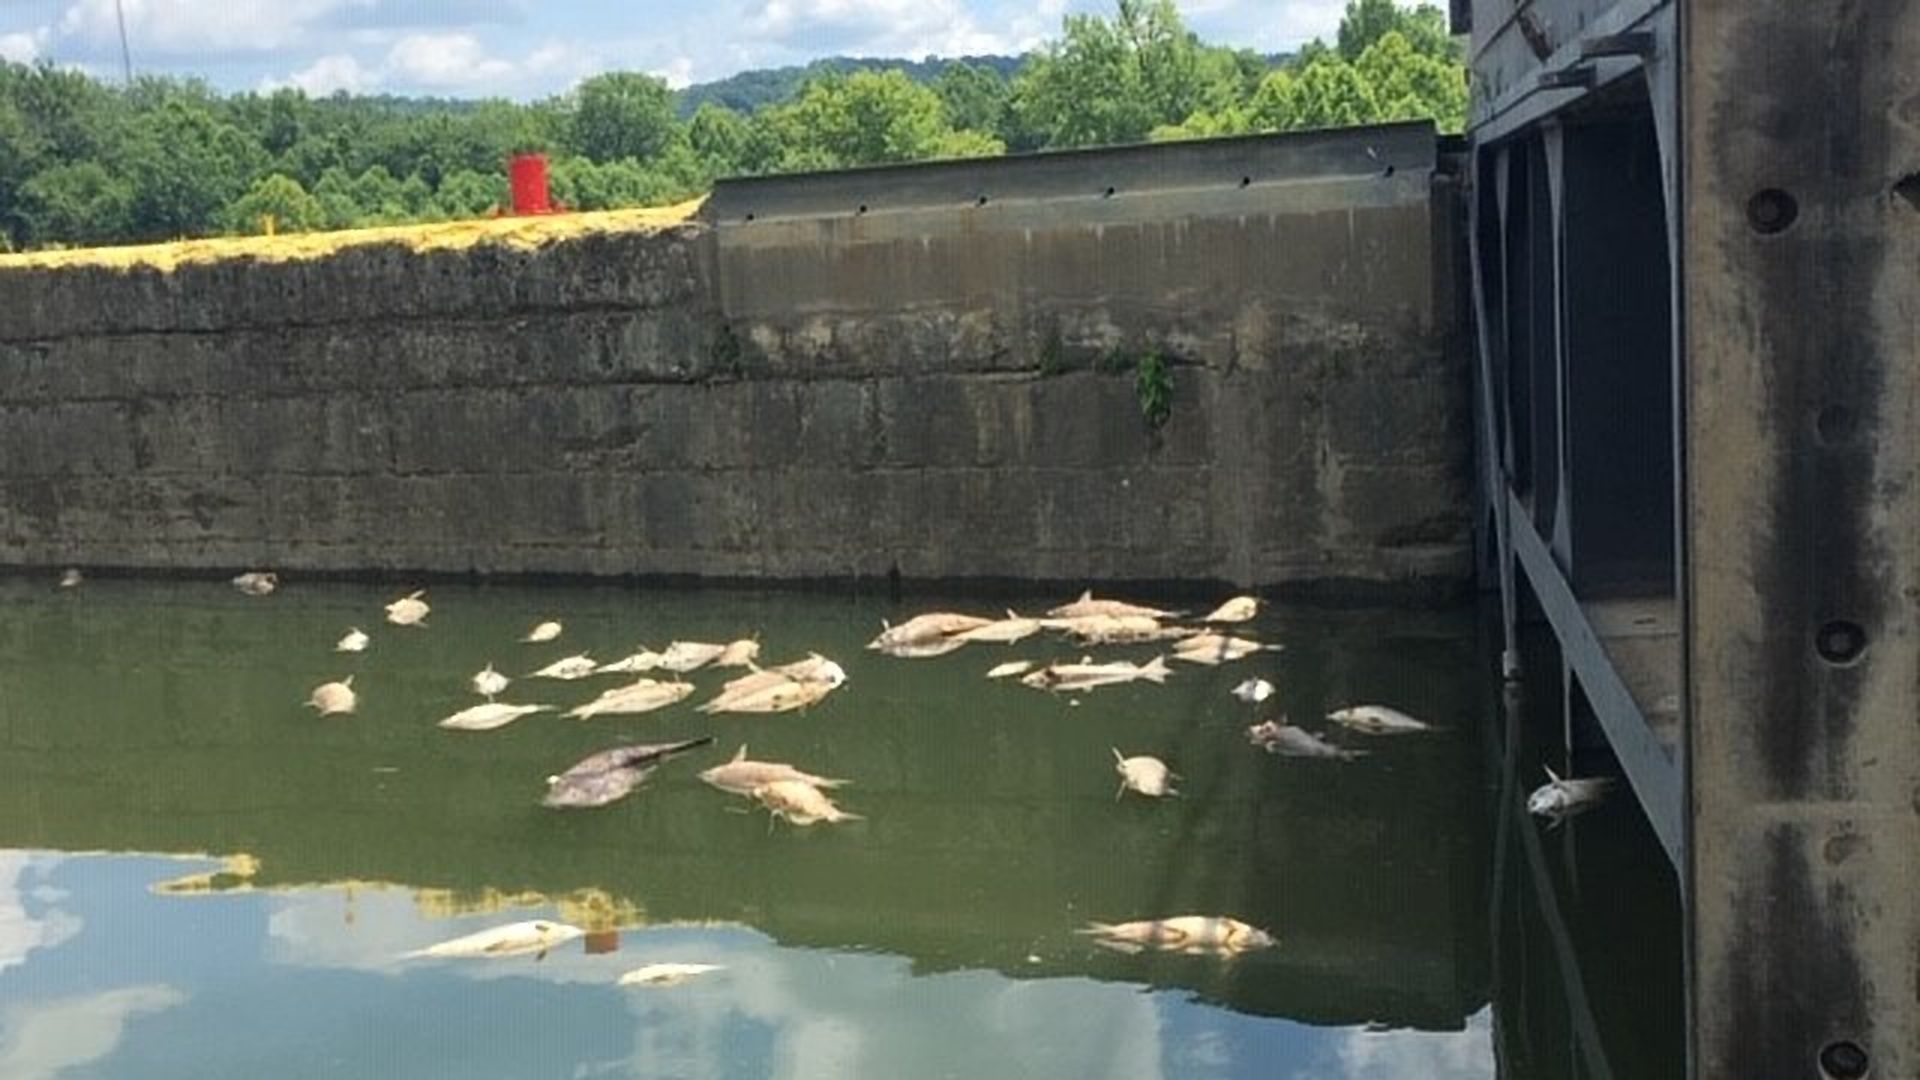 Dead fish in the Kentucky River after the Jim Beam fire.